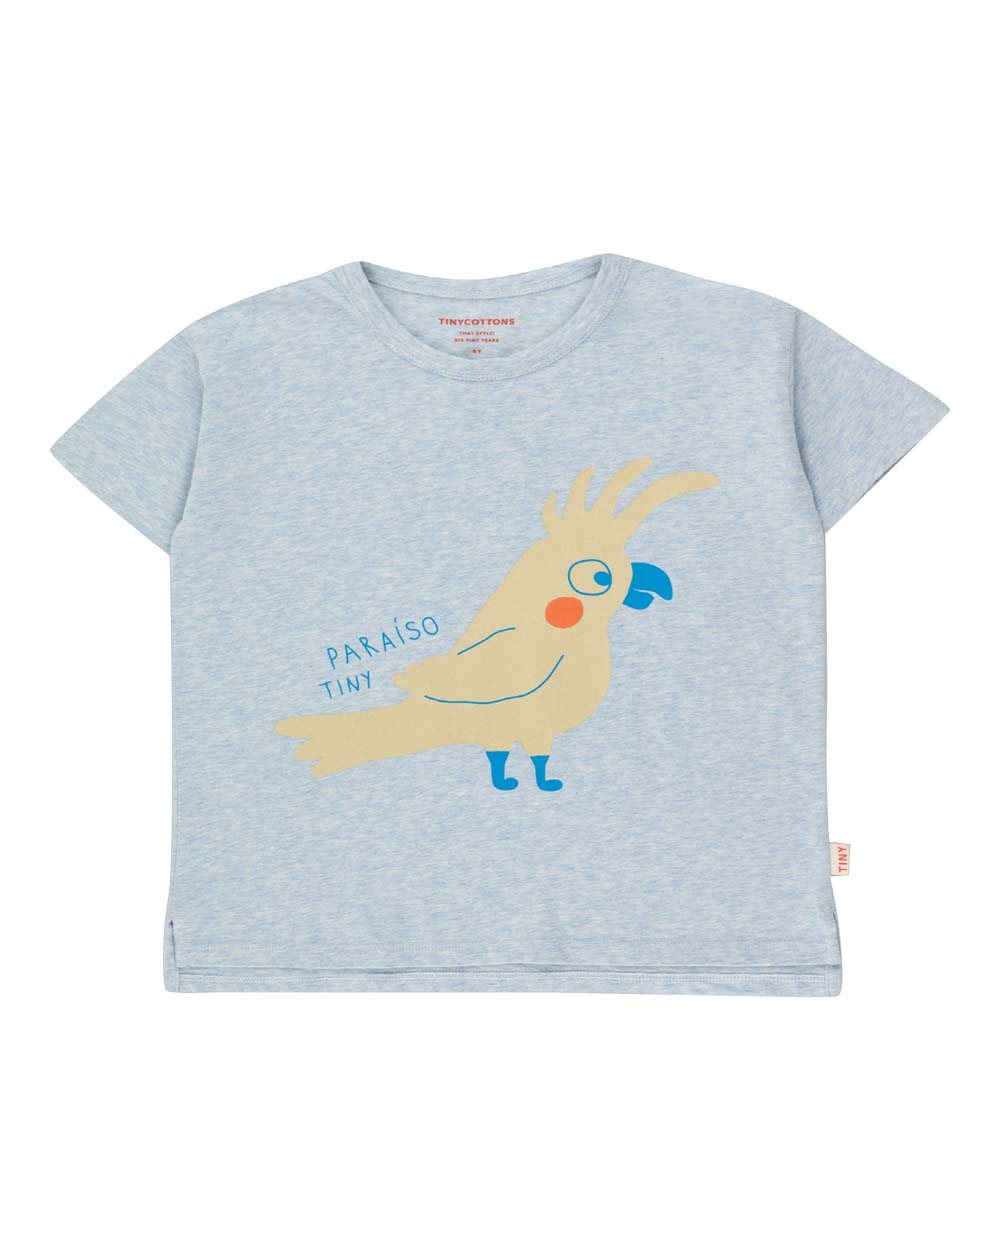 [TINY COTTONS]PAPAGAYO TEE /light blue heather [10Y, 12Y]